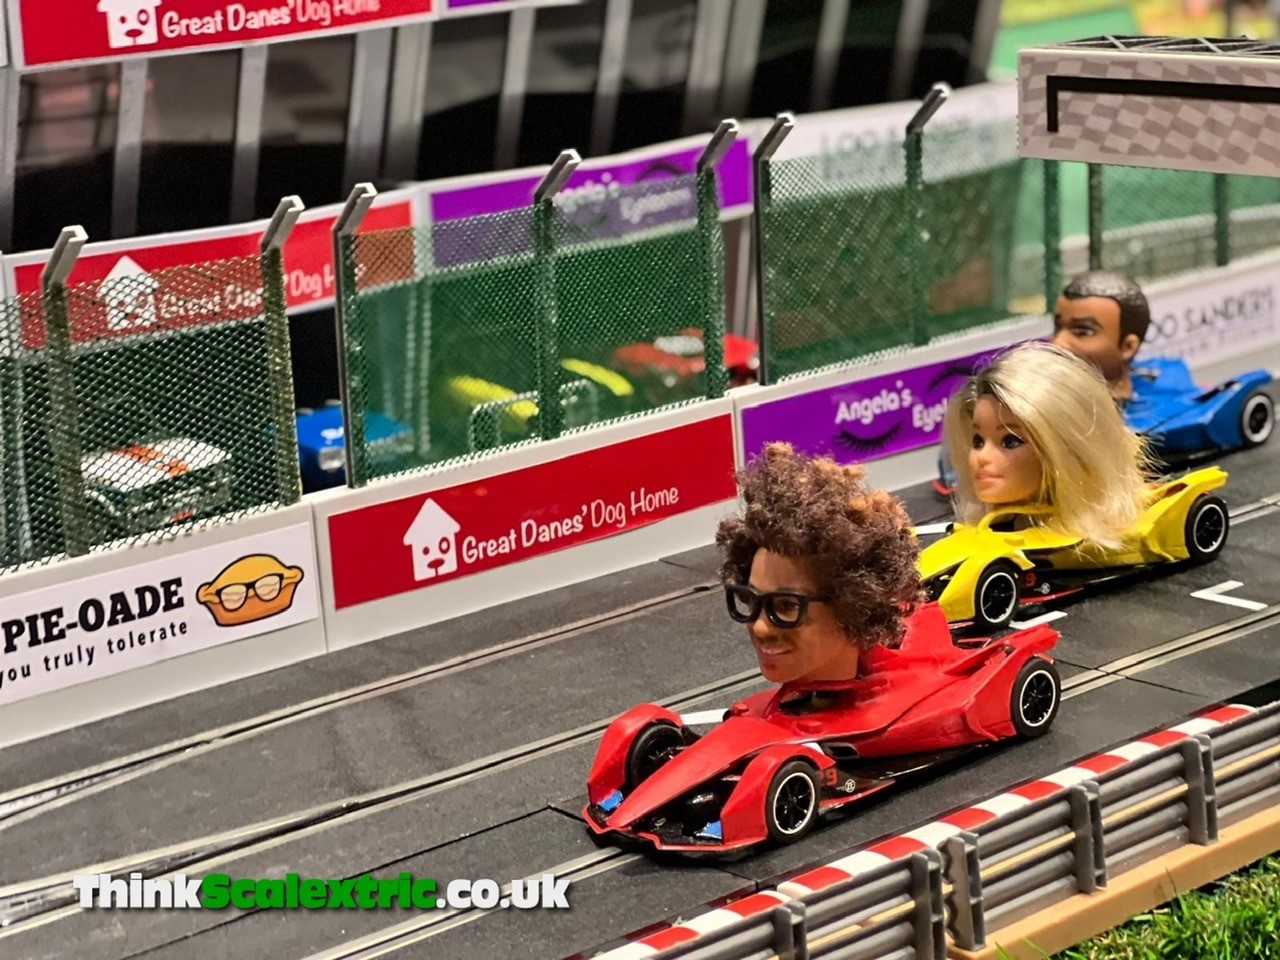 dave tv question team think scalextric bespoke track hire